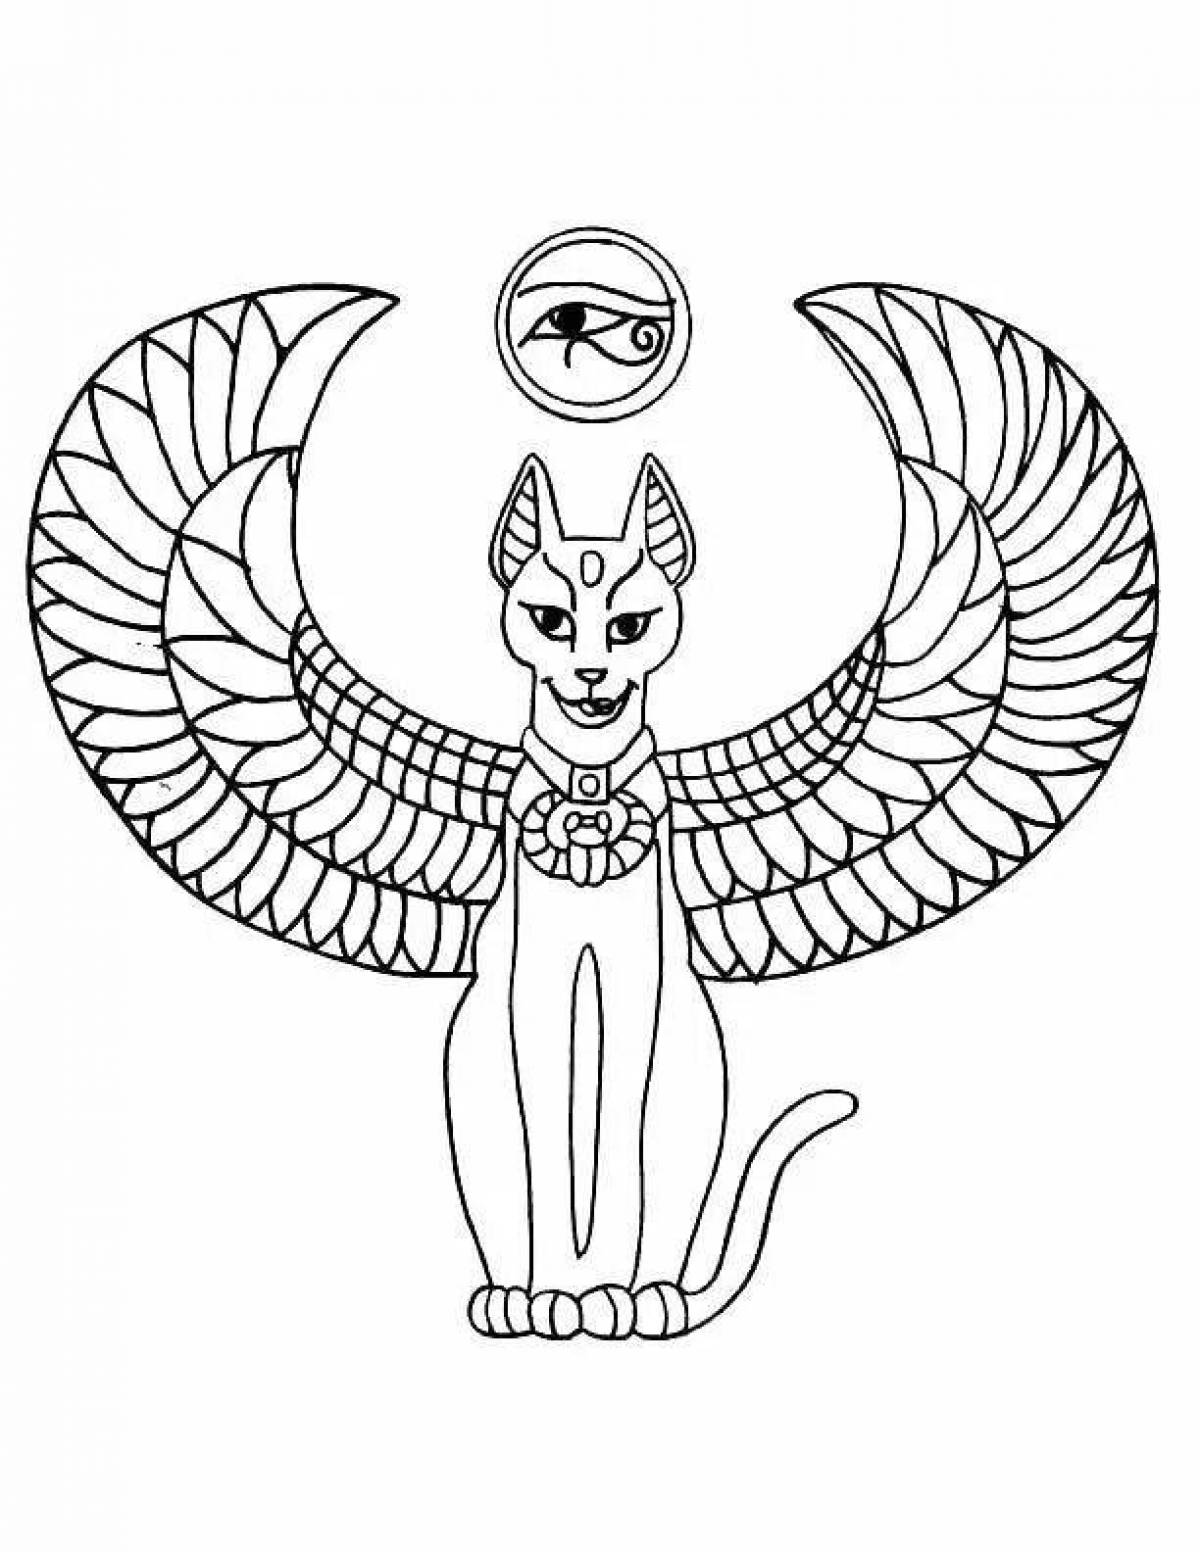 Coloring book outstanding egyptian cat